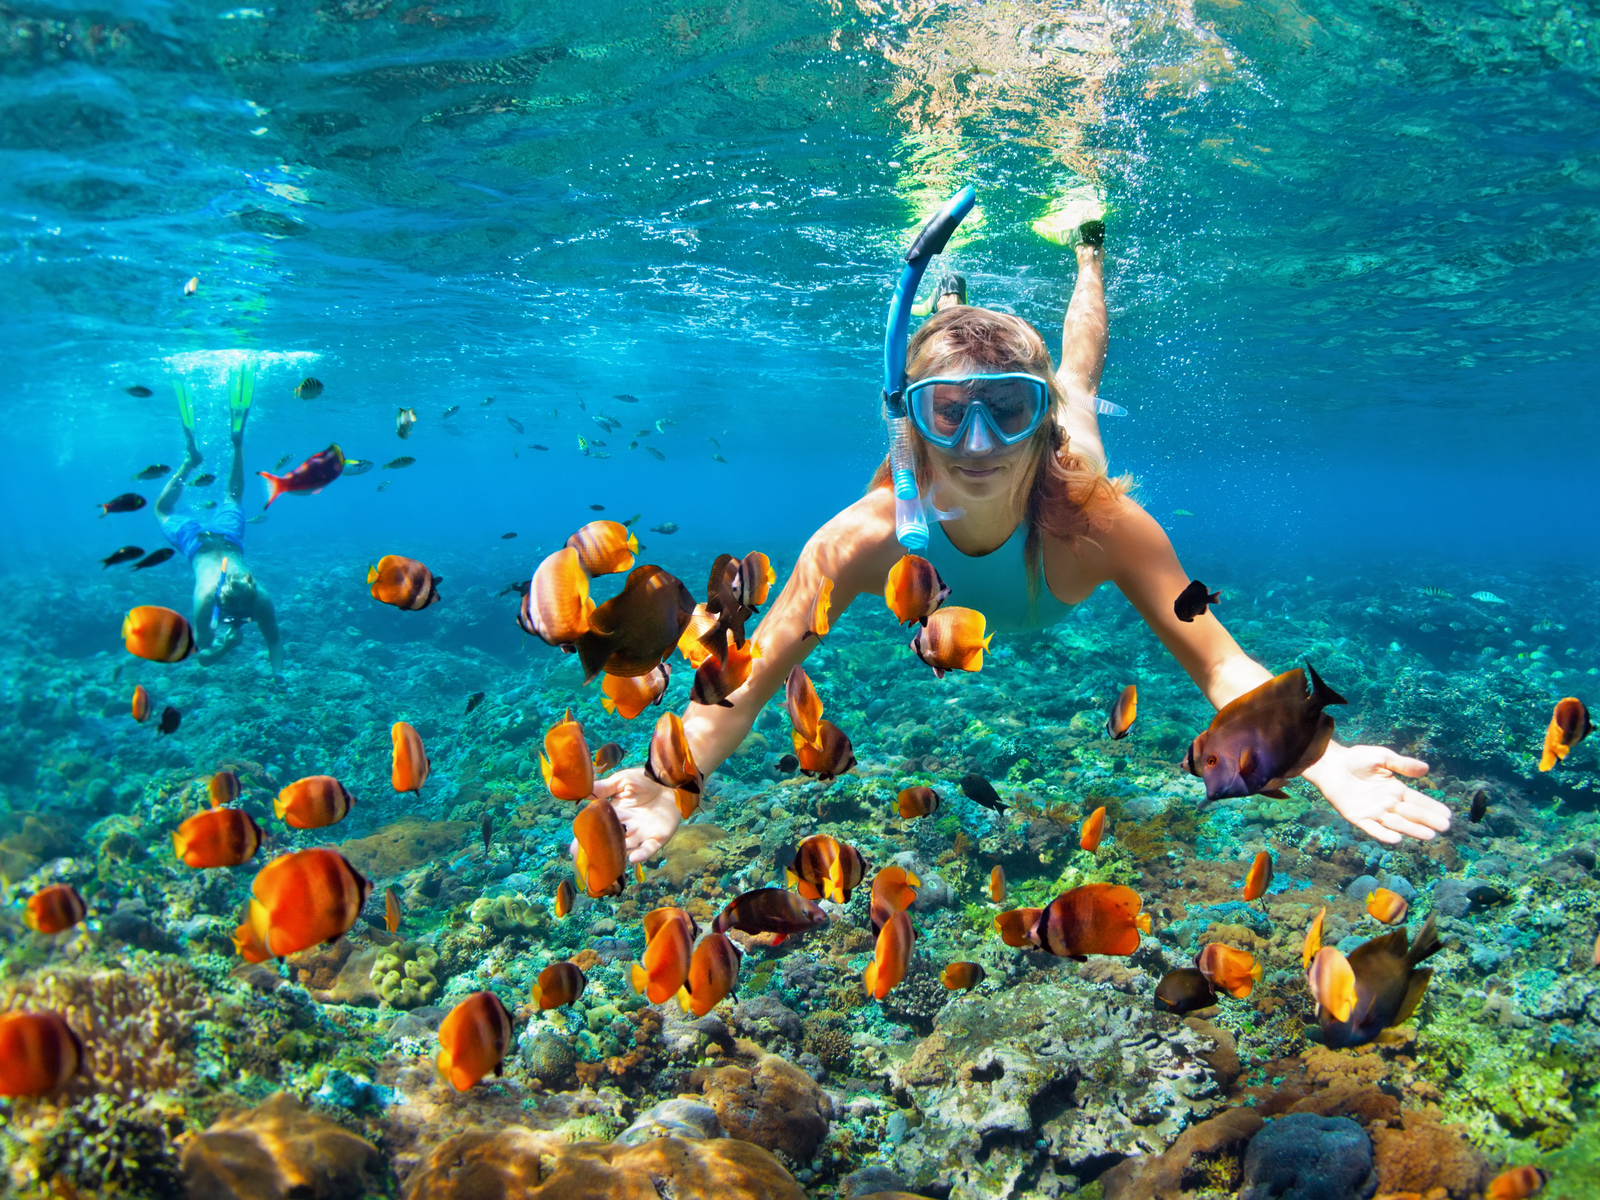 Two people, surrounded by vibrant tropical fishes, snorkeling at one of the best snorkeling spots in Hawaii where thriving coral reefs are nestled at the sea floor